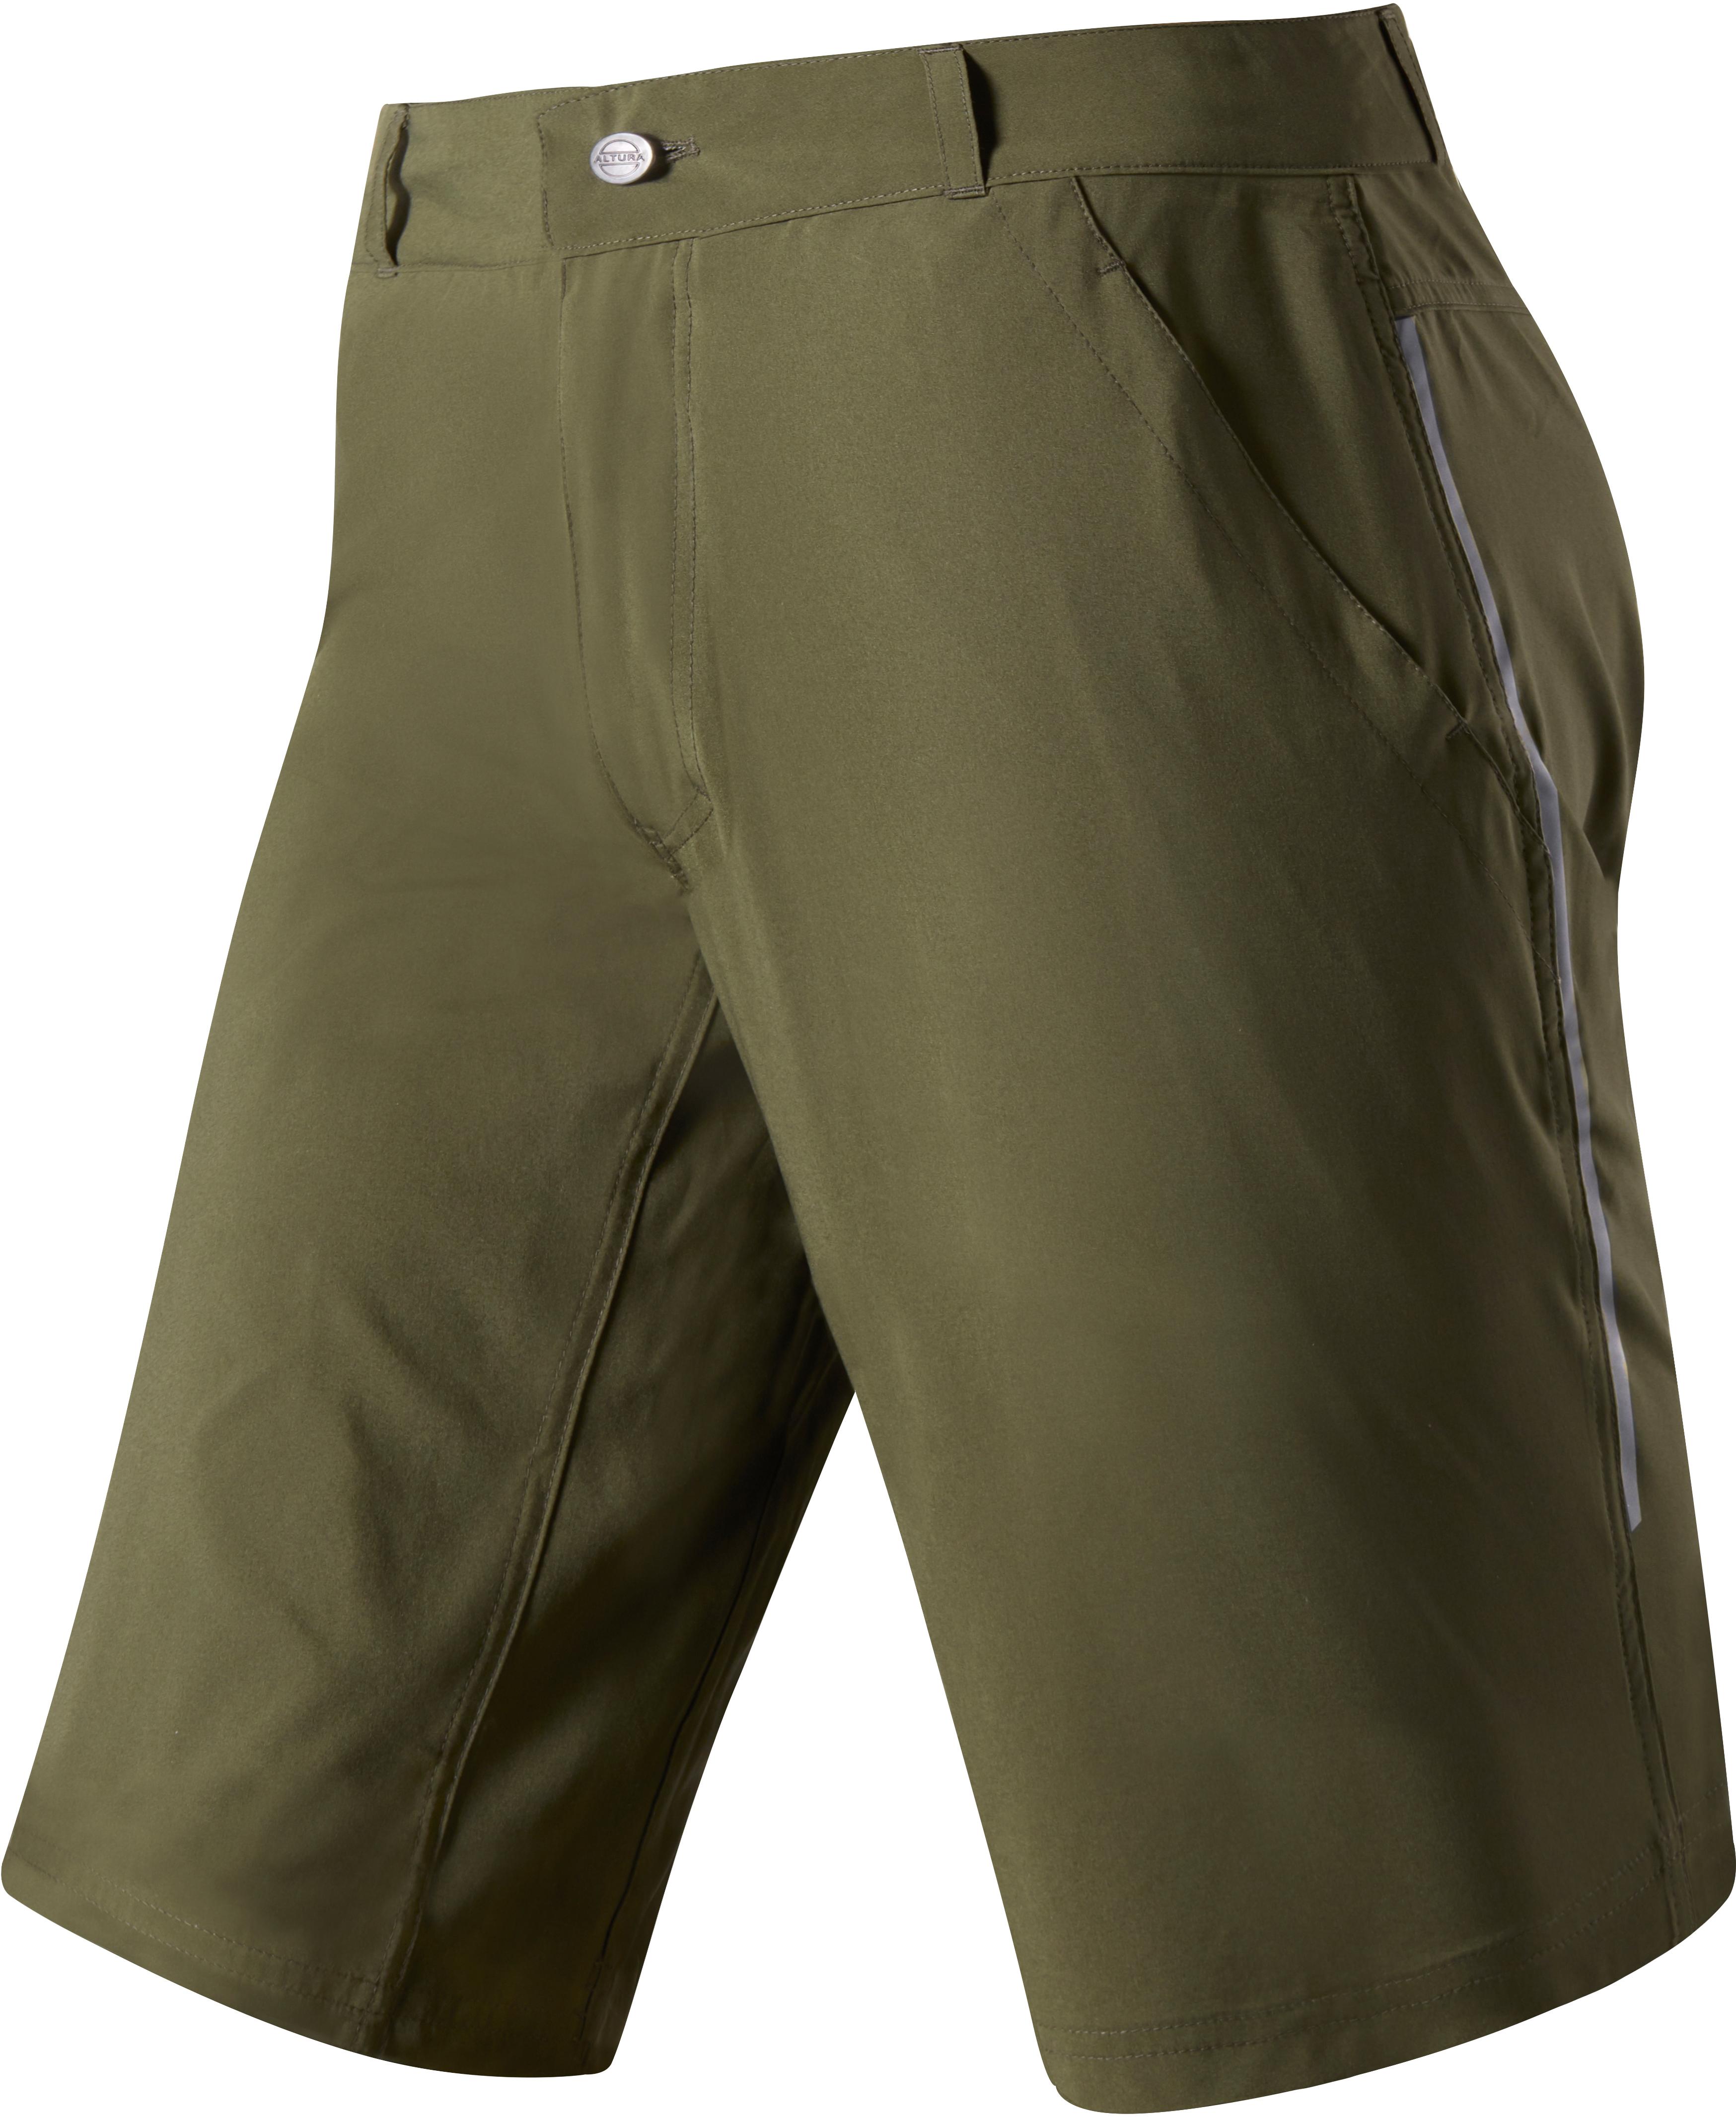 Altura All Roads Shorts - Olive - Small